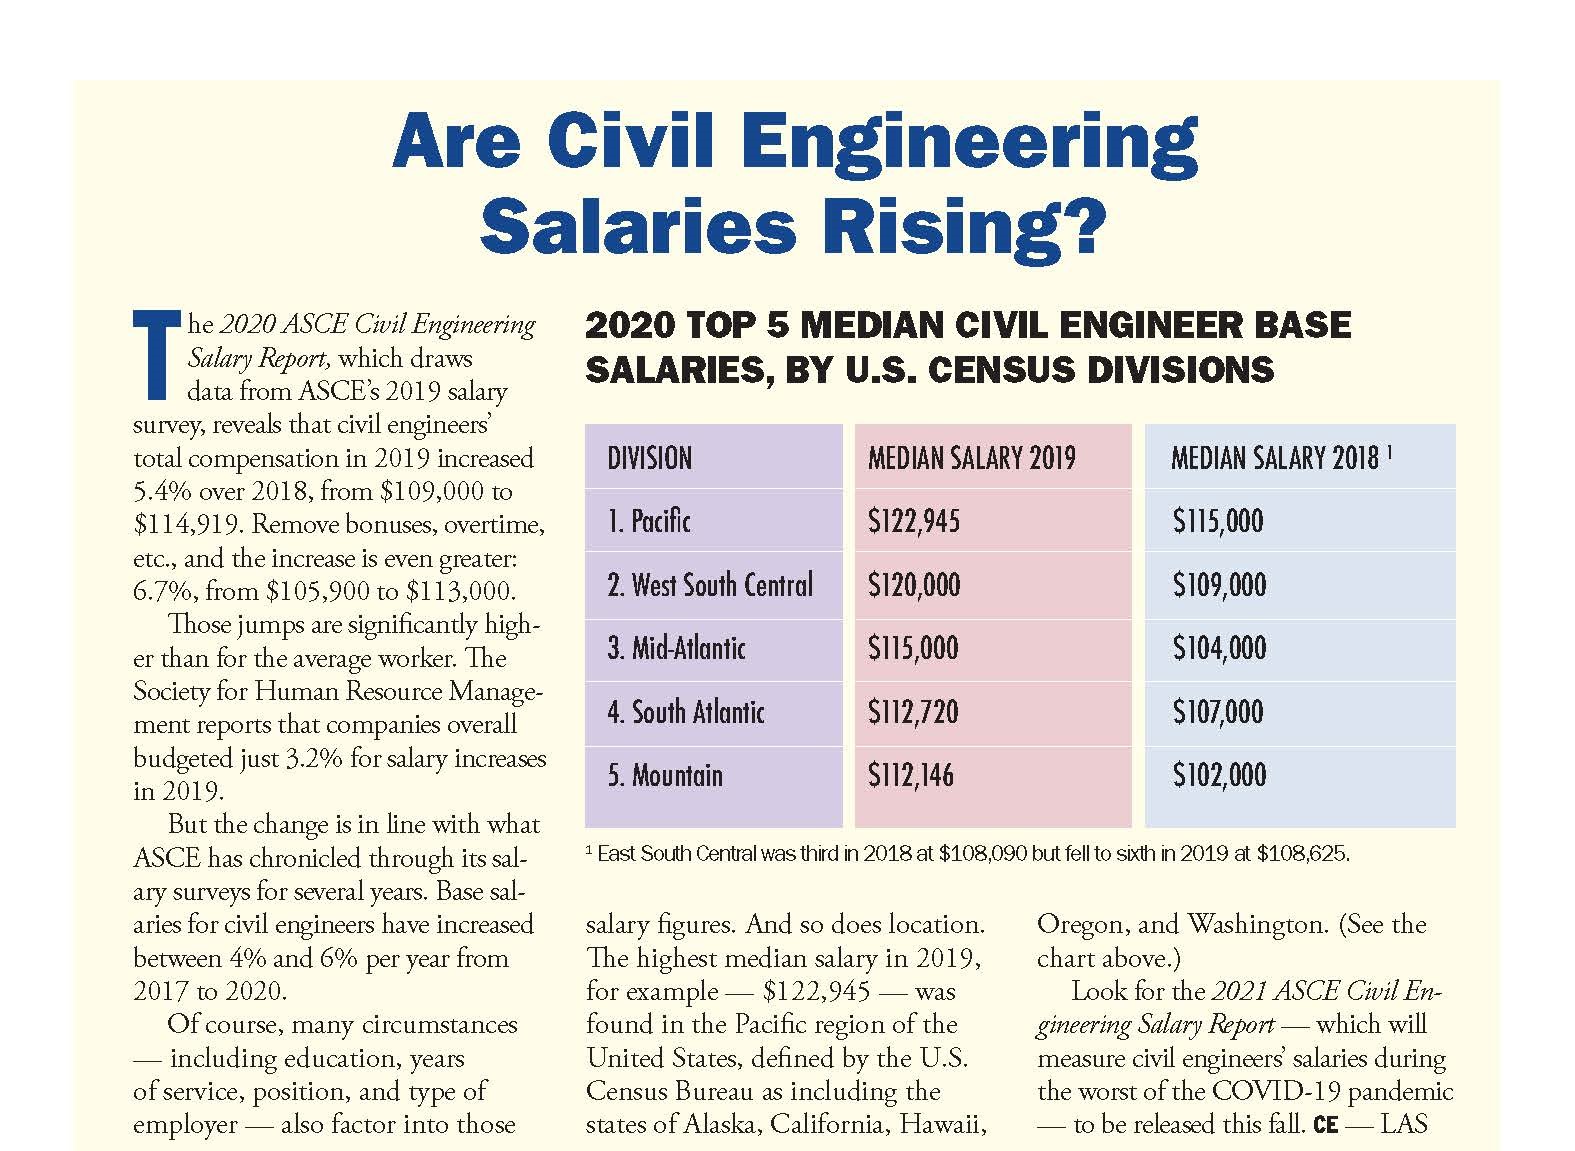 chart showing the top 5 median civil engineer base salaries by US census divisions (pacific, west south central, mid atlantic, south atlantic, and mountain). the chart compares 2018 and 2019.